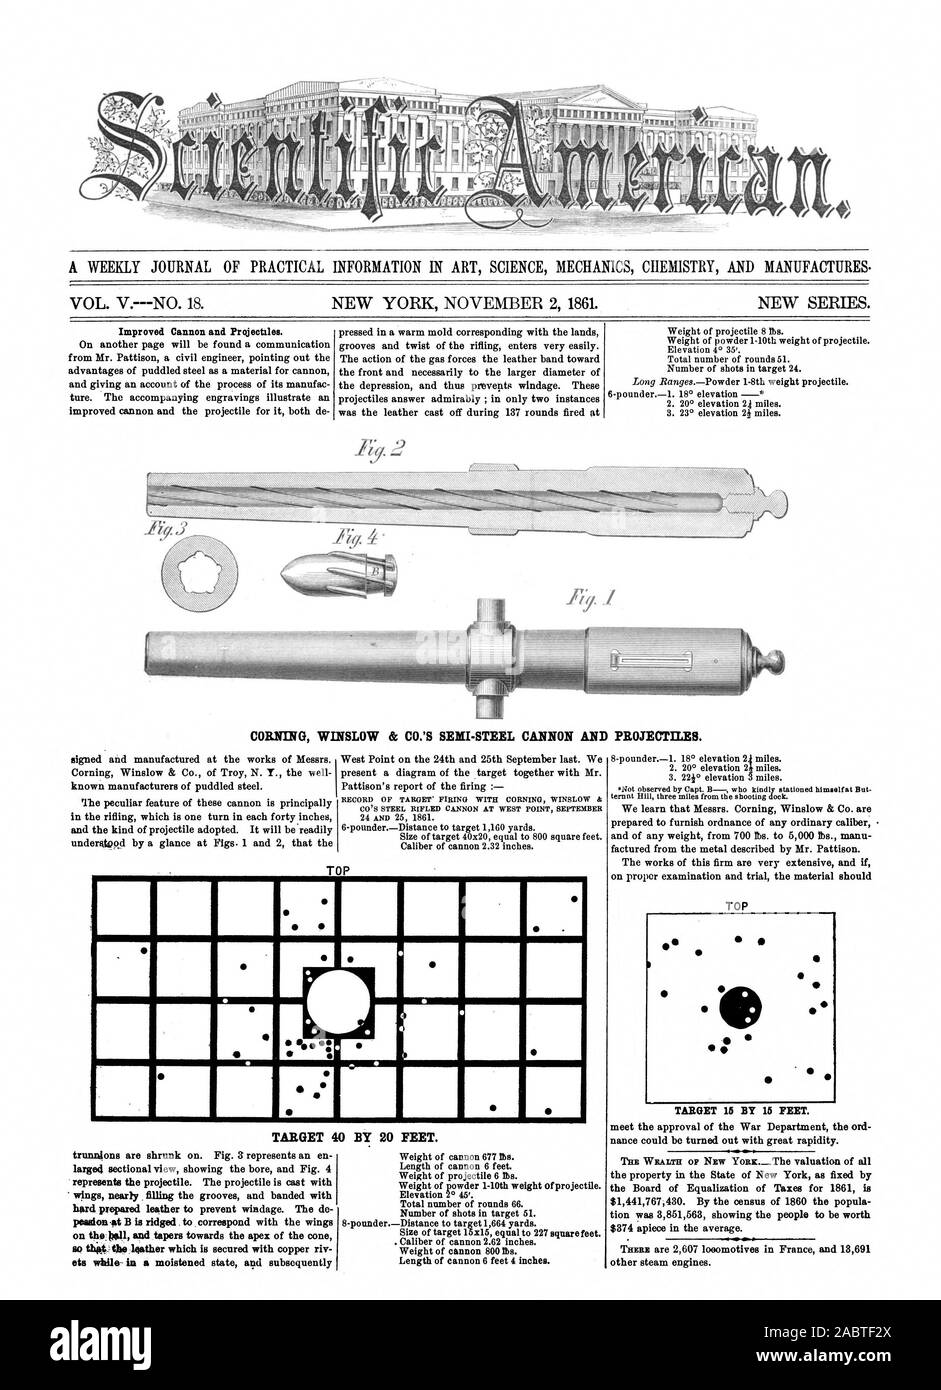 Improved Cannon and Projectiles. CORNING WINSLOW & CO.'S SEMI-STEEL CANNON AND PROJECTILES. . s e .  TARGET 40 BY 20 FEET. larged sectional view showing the bore and Fig. 4 represents the projectile. The projectile is cast with wings nearly filling the grooves and banded with hard prepared leather to prevent windage. The do peaalon.at B is ridged to correspond with the wings on the hall and tapers towards the apex of the cone ets while in a moistened state and subsequently TOP TARGET 15 BY 15 FEET., scientific american, 1861-11-02 Stock Photo